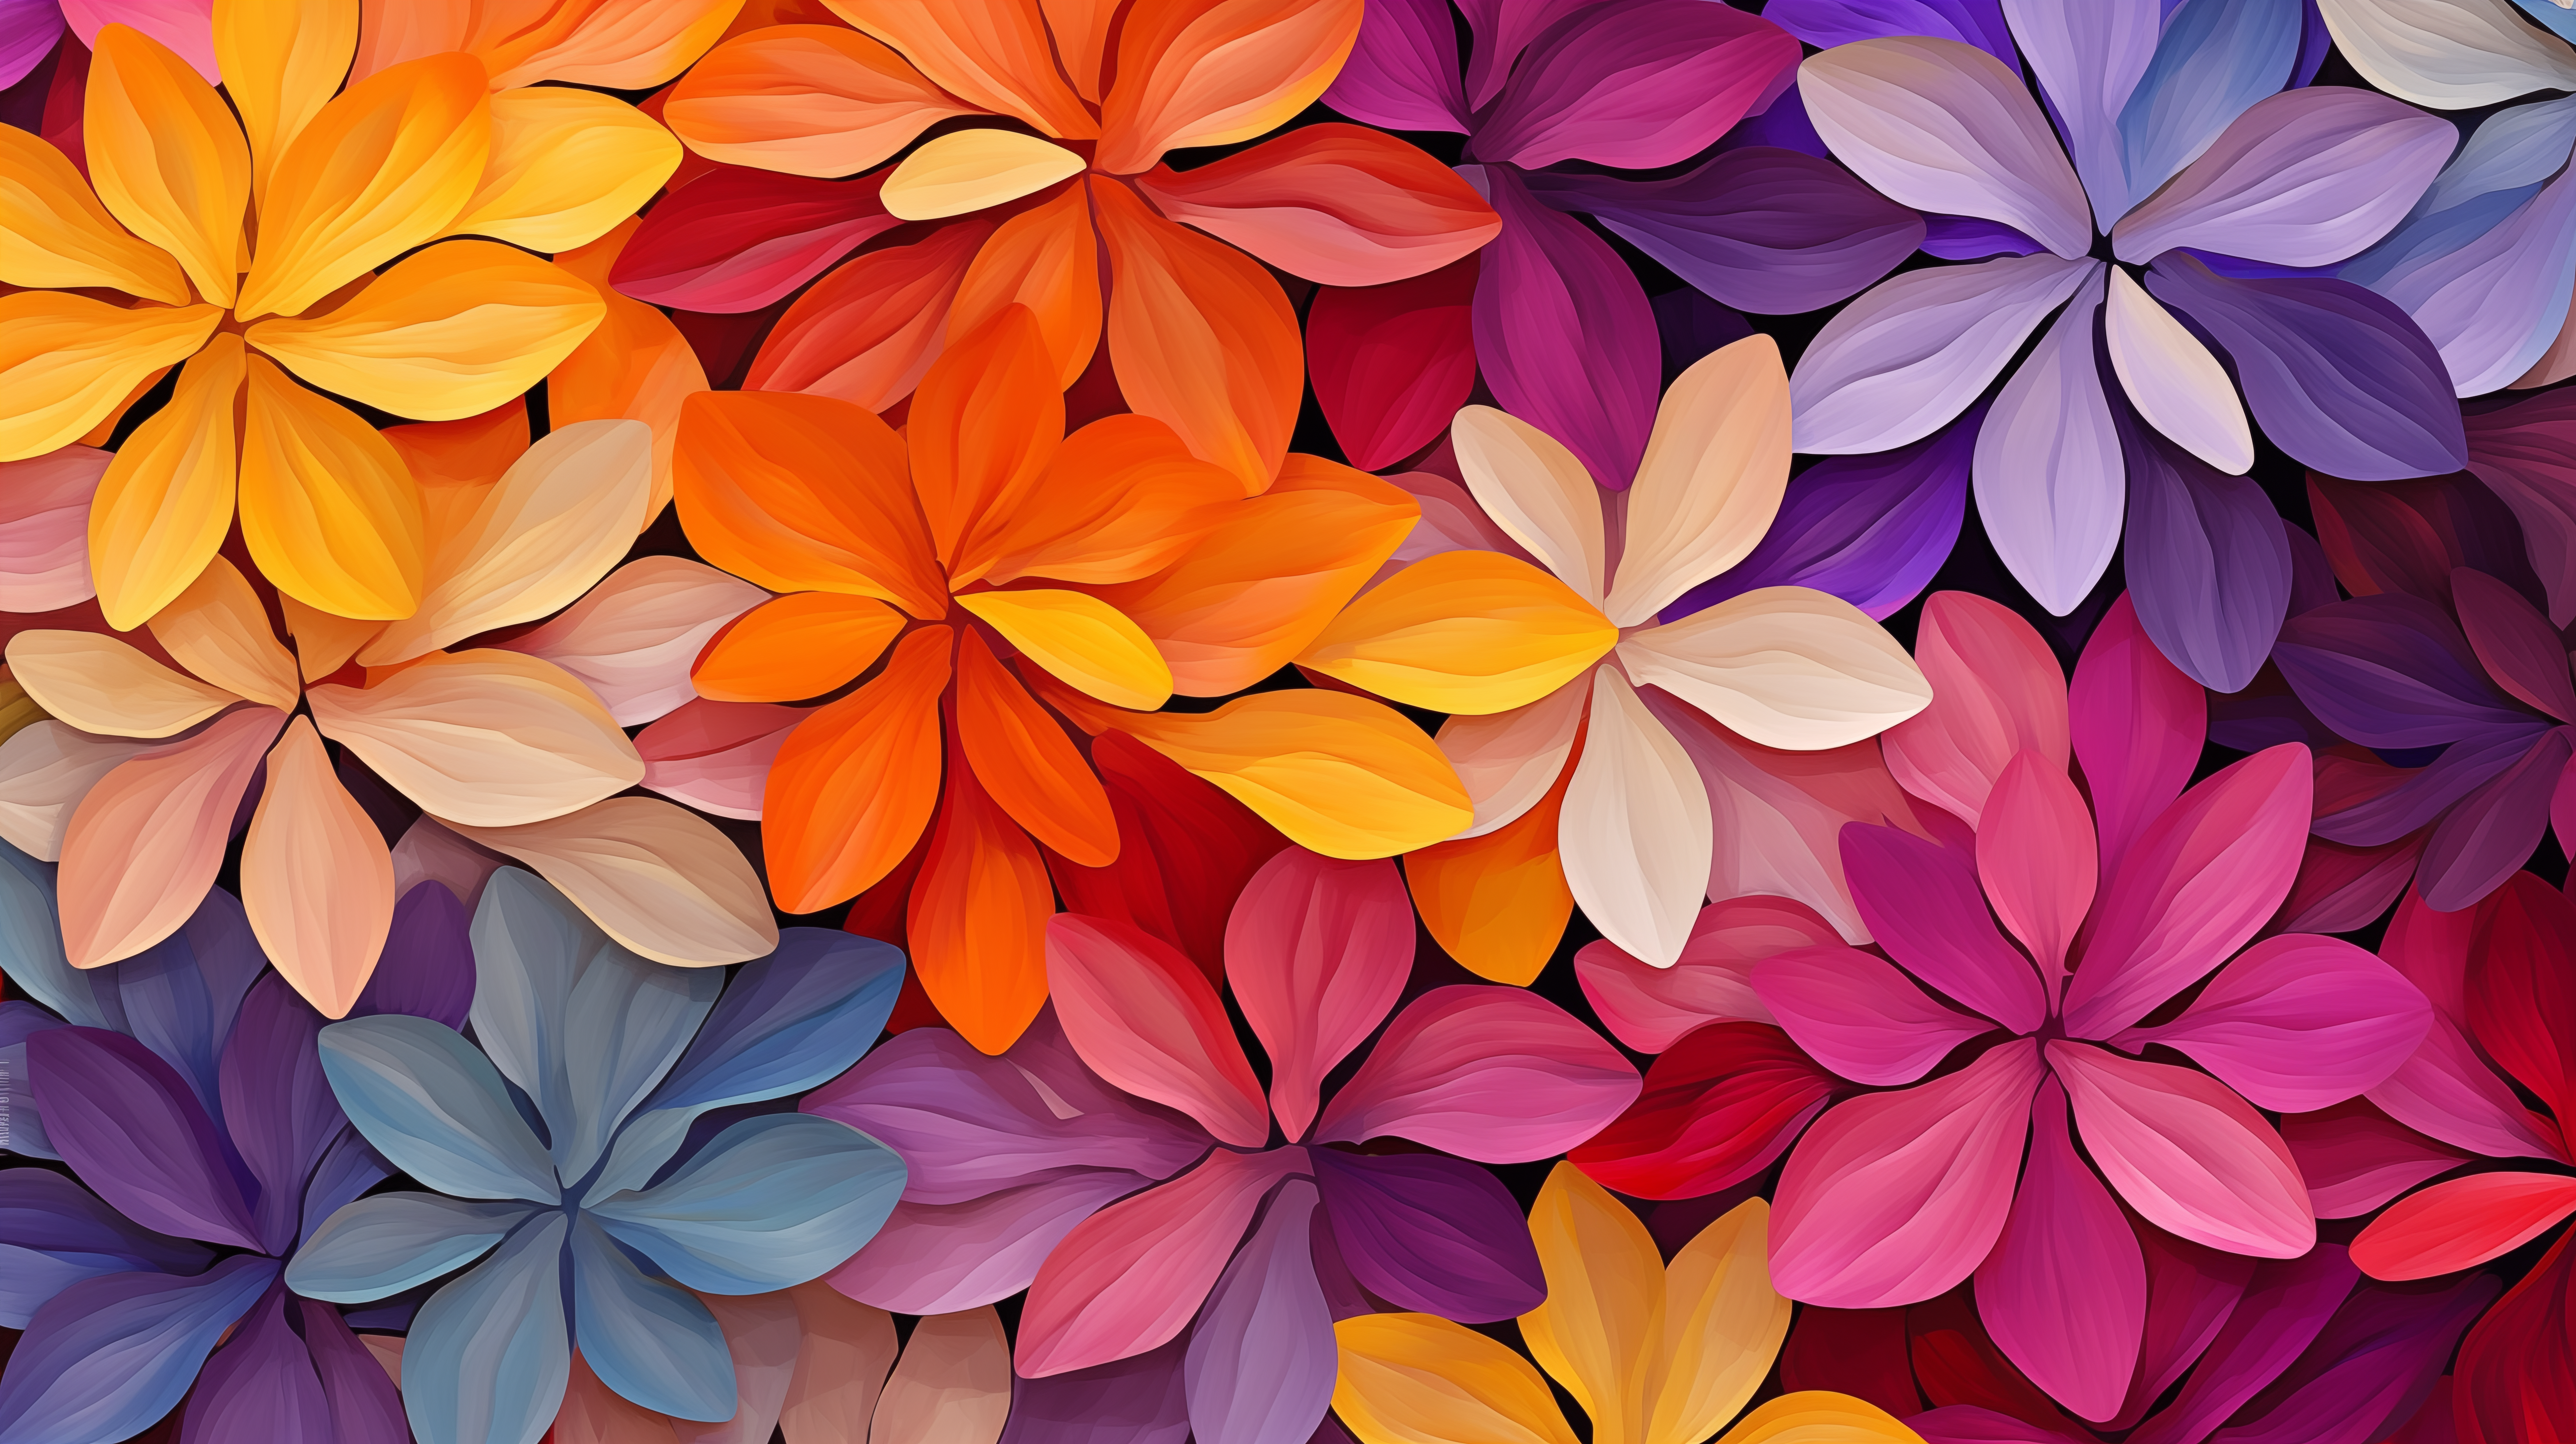 Colorful flower petals in vibrant orange, purple, and pink shades forming an HD floral desktop wallpaper background.